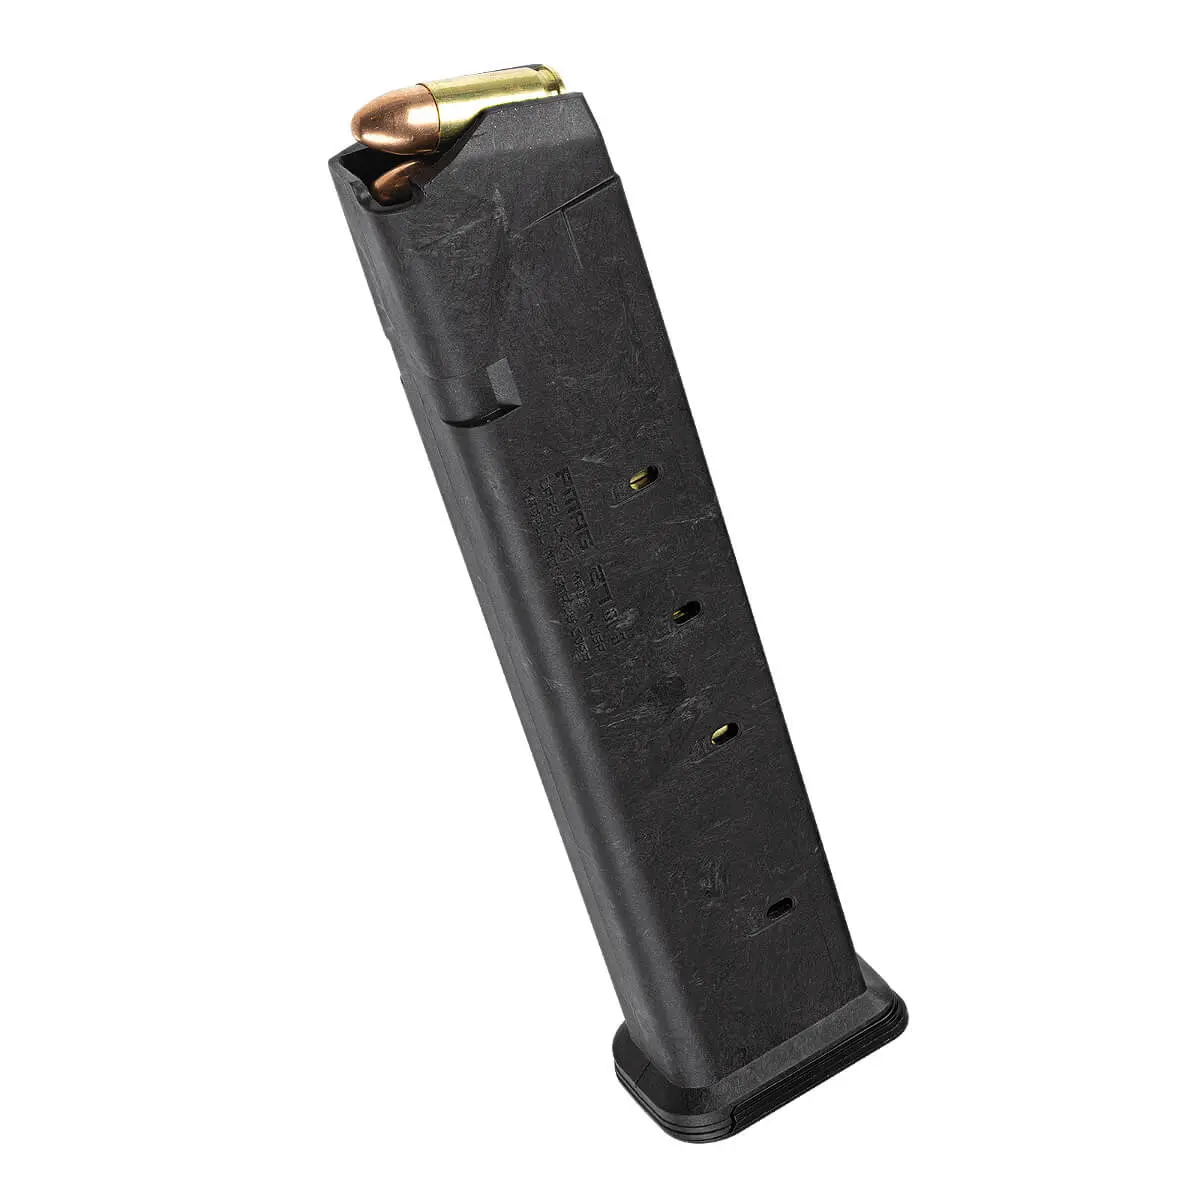 Magpul GL9 PMAG for Glock 9mm Pistols – 27 Rounds